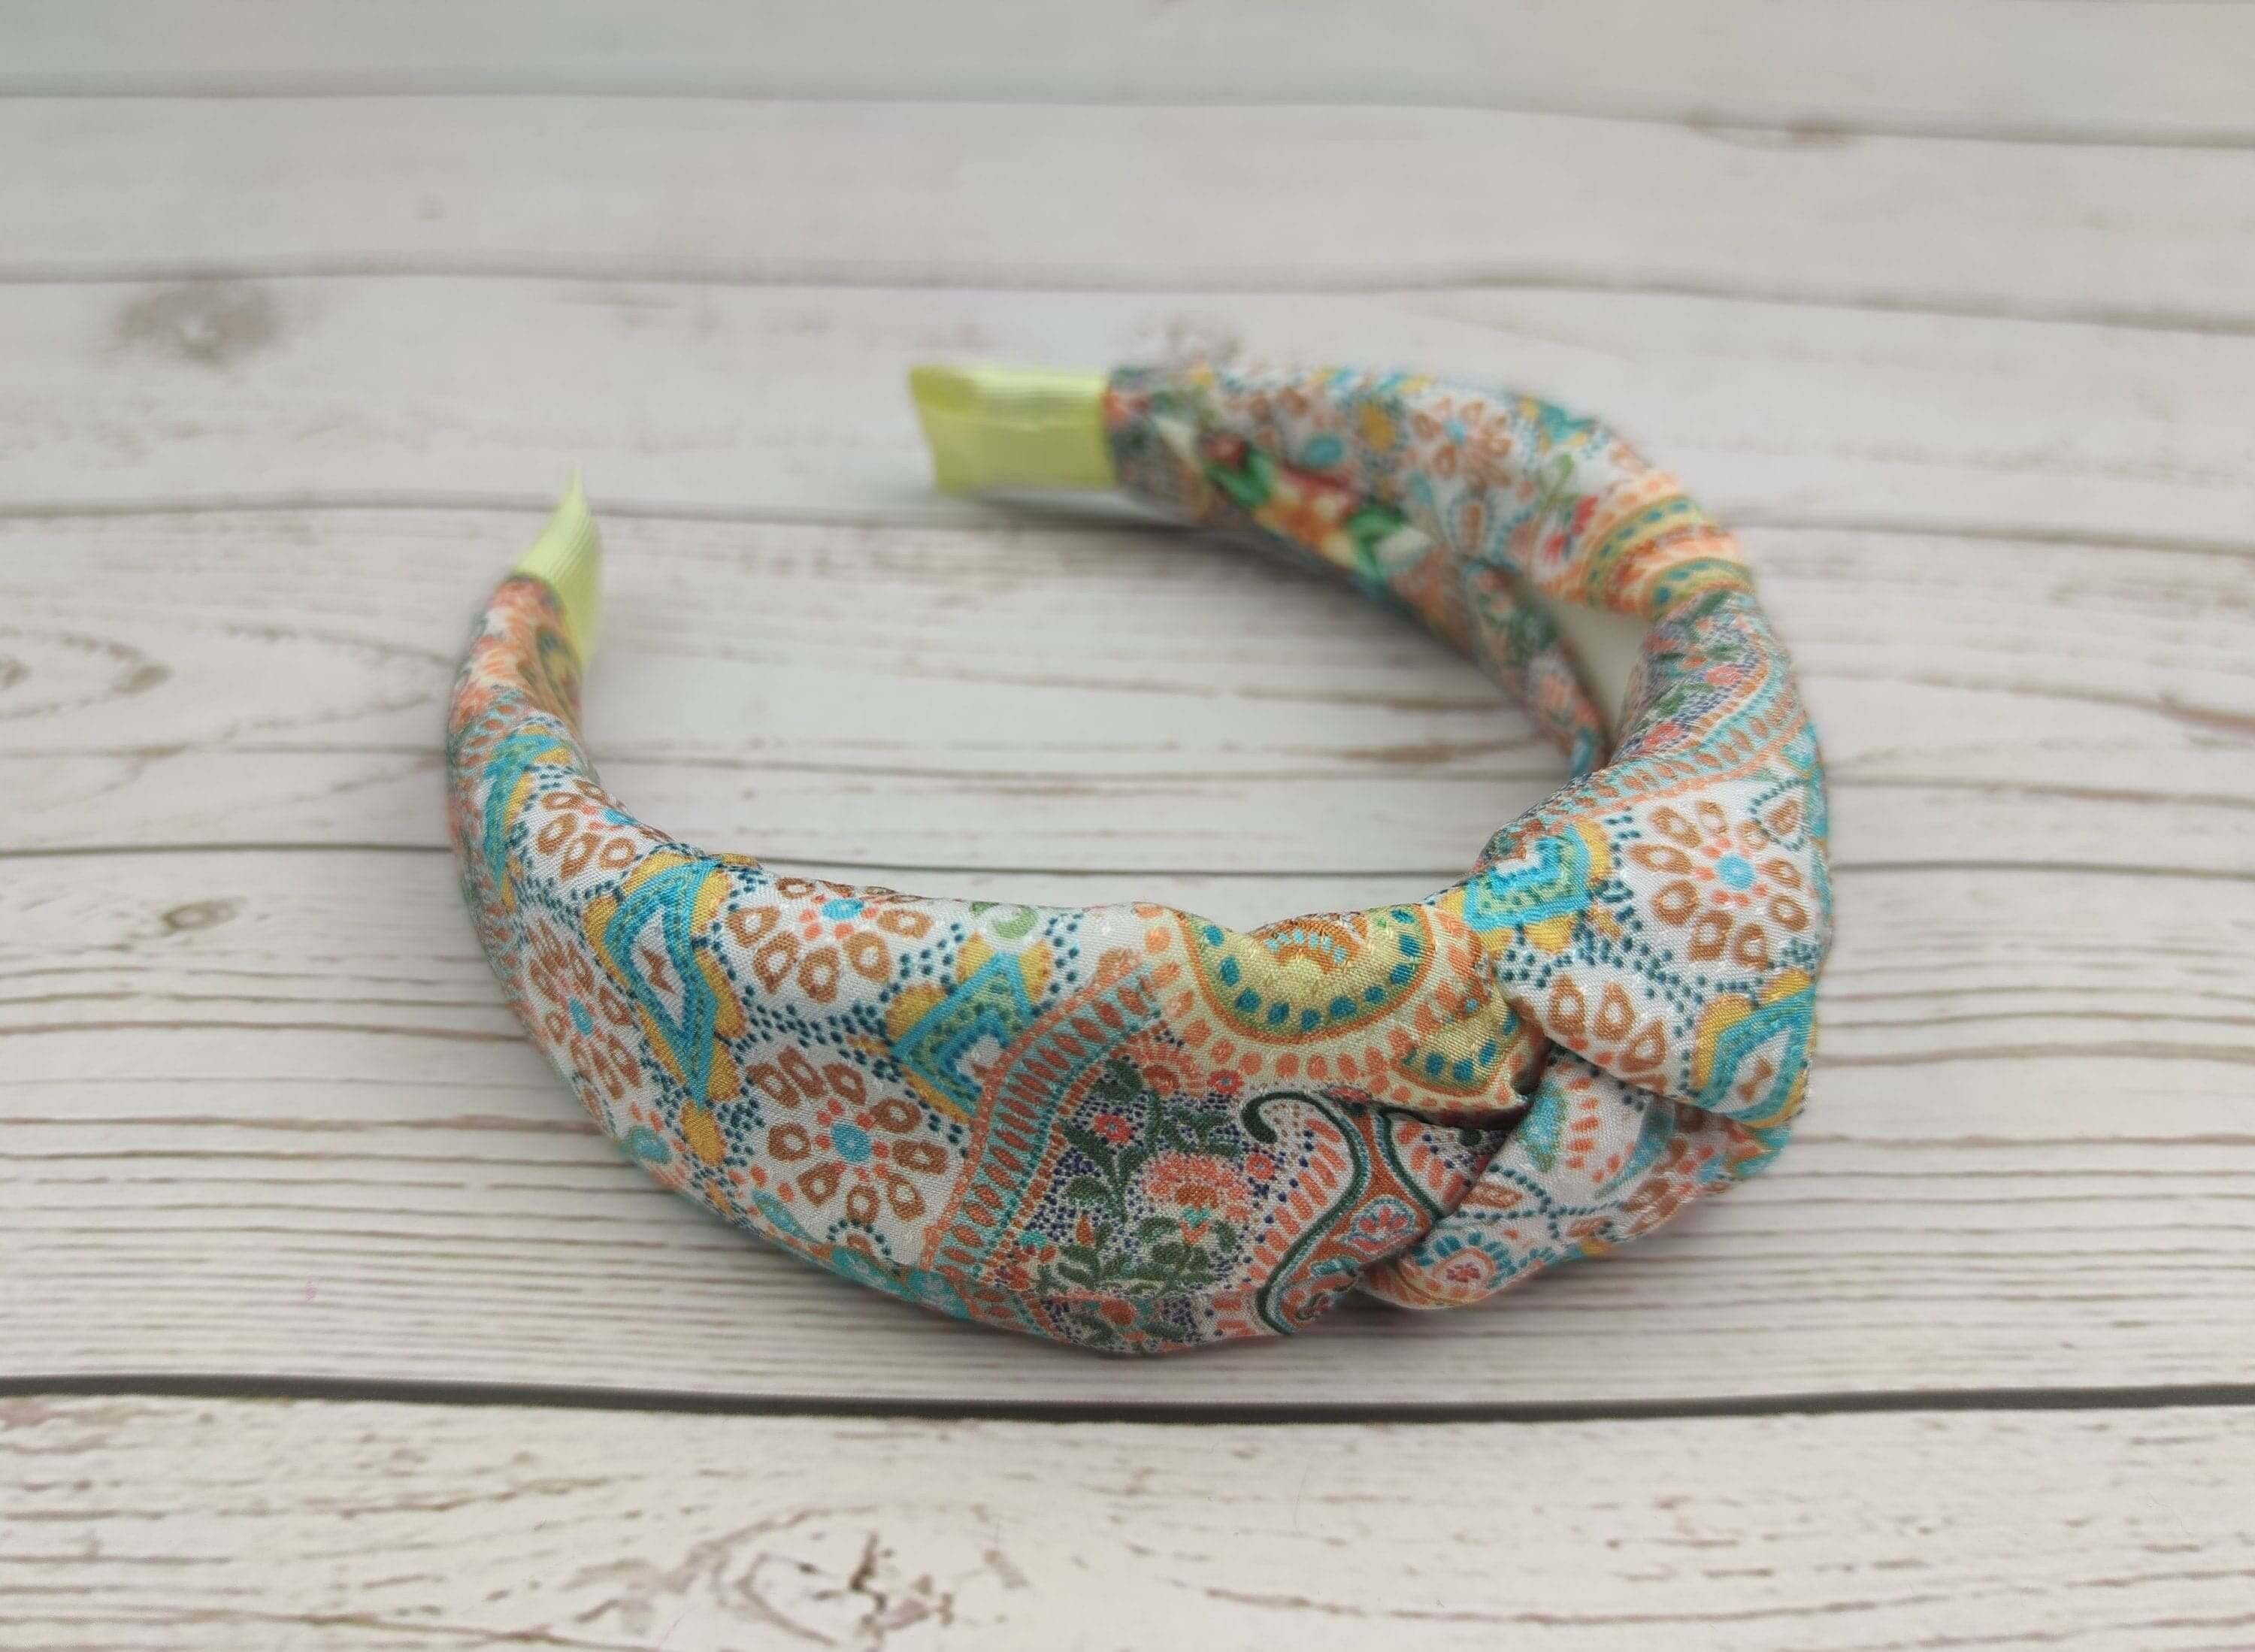 A vibrant headband featuring a colorful knot design in pastel shades.